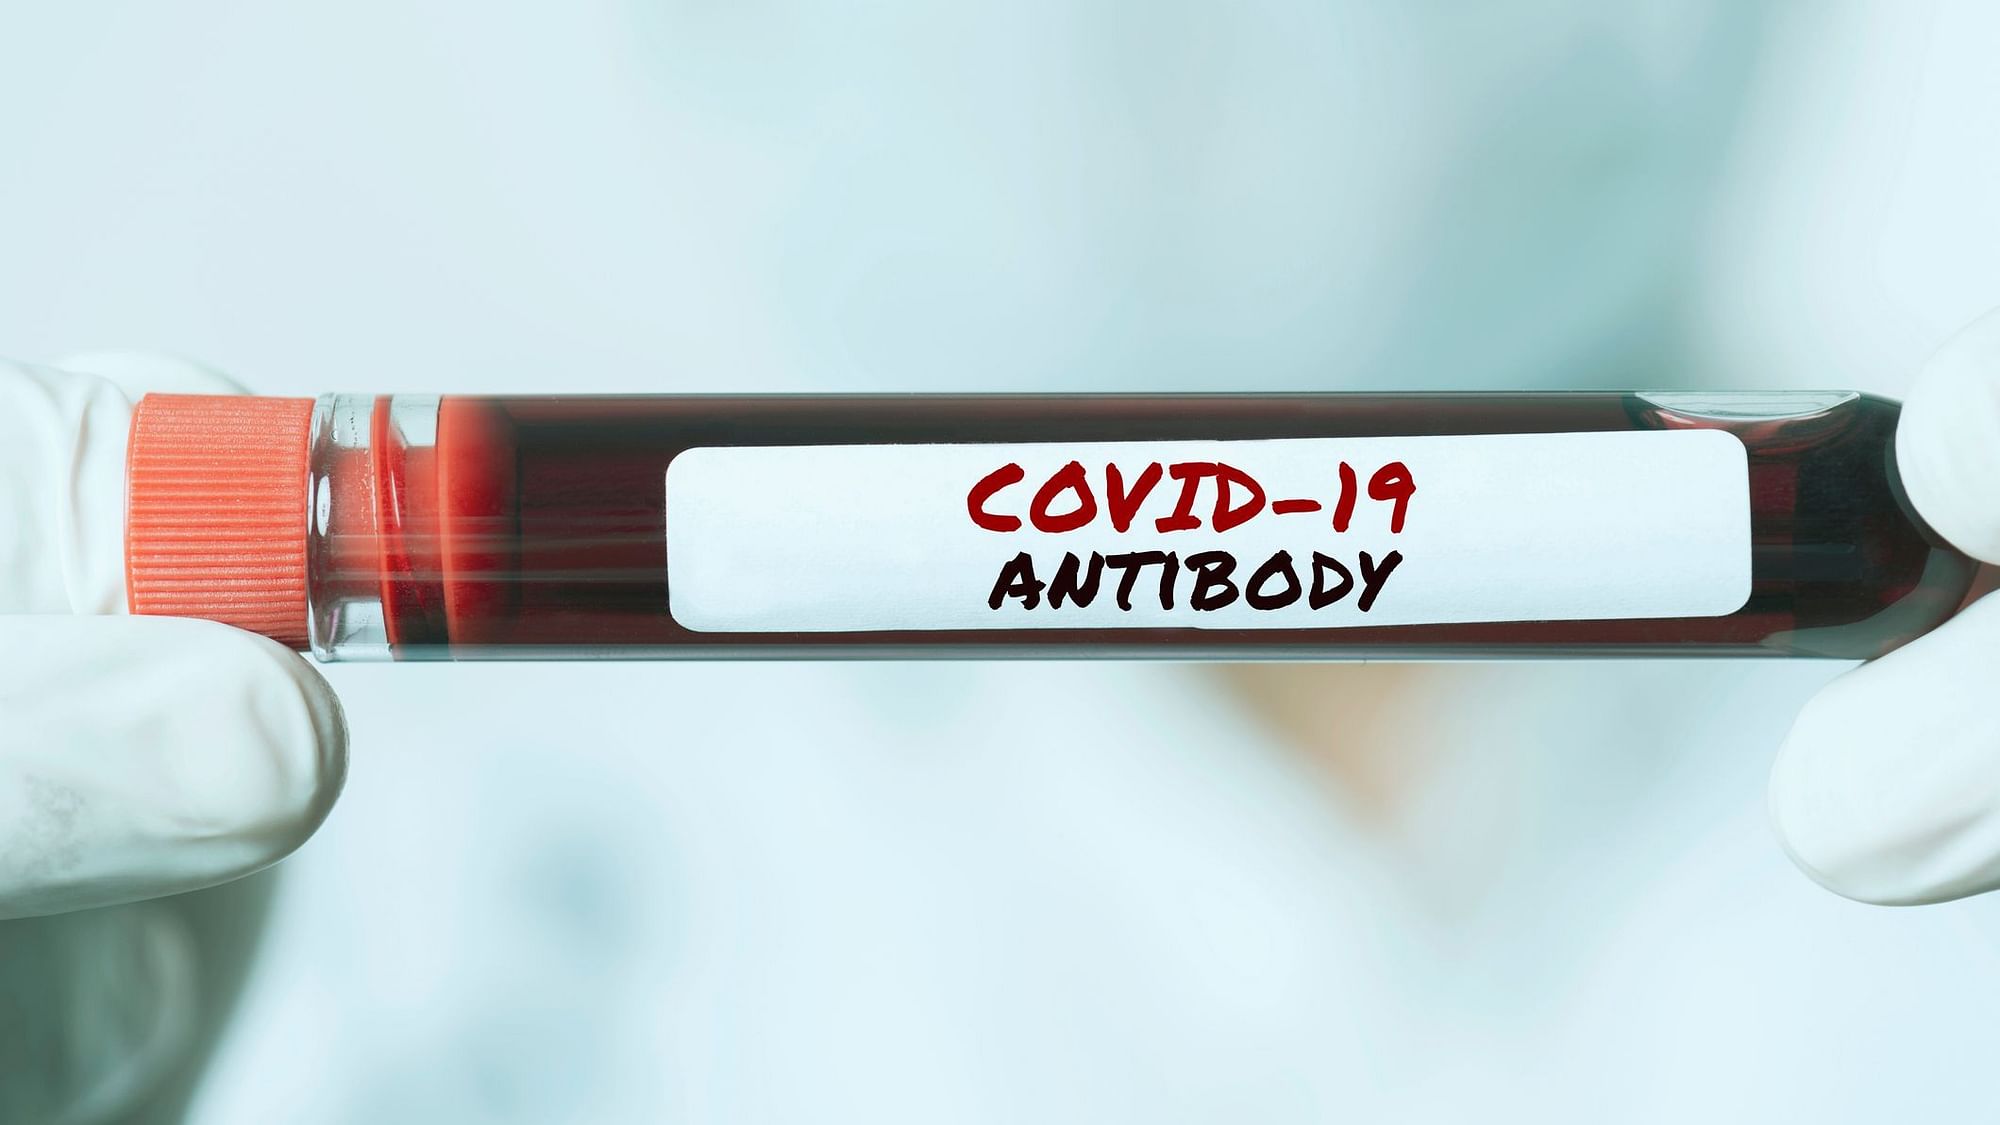 The study shows that, on an average, across Delhi, 23.48 percent of the population may already have COVID-19 antibodies.